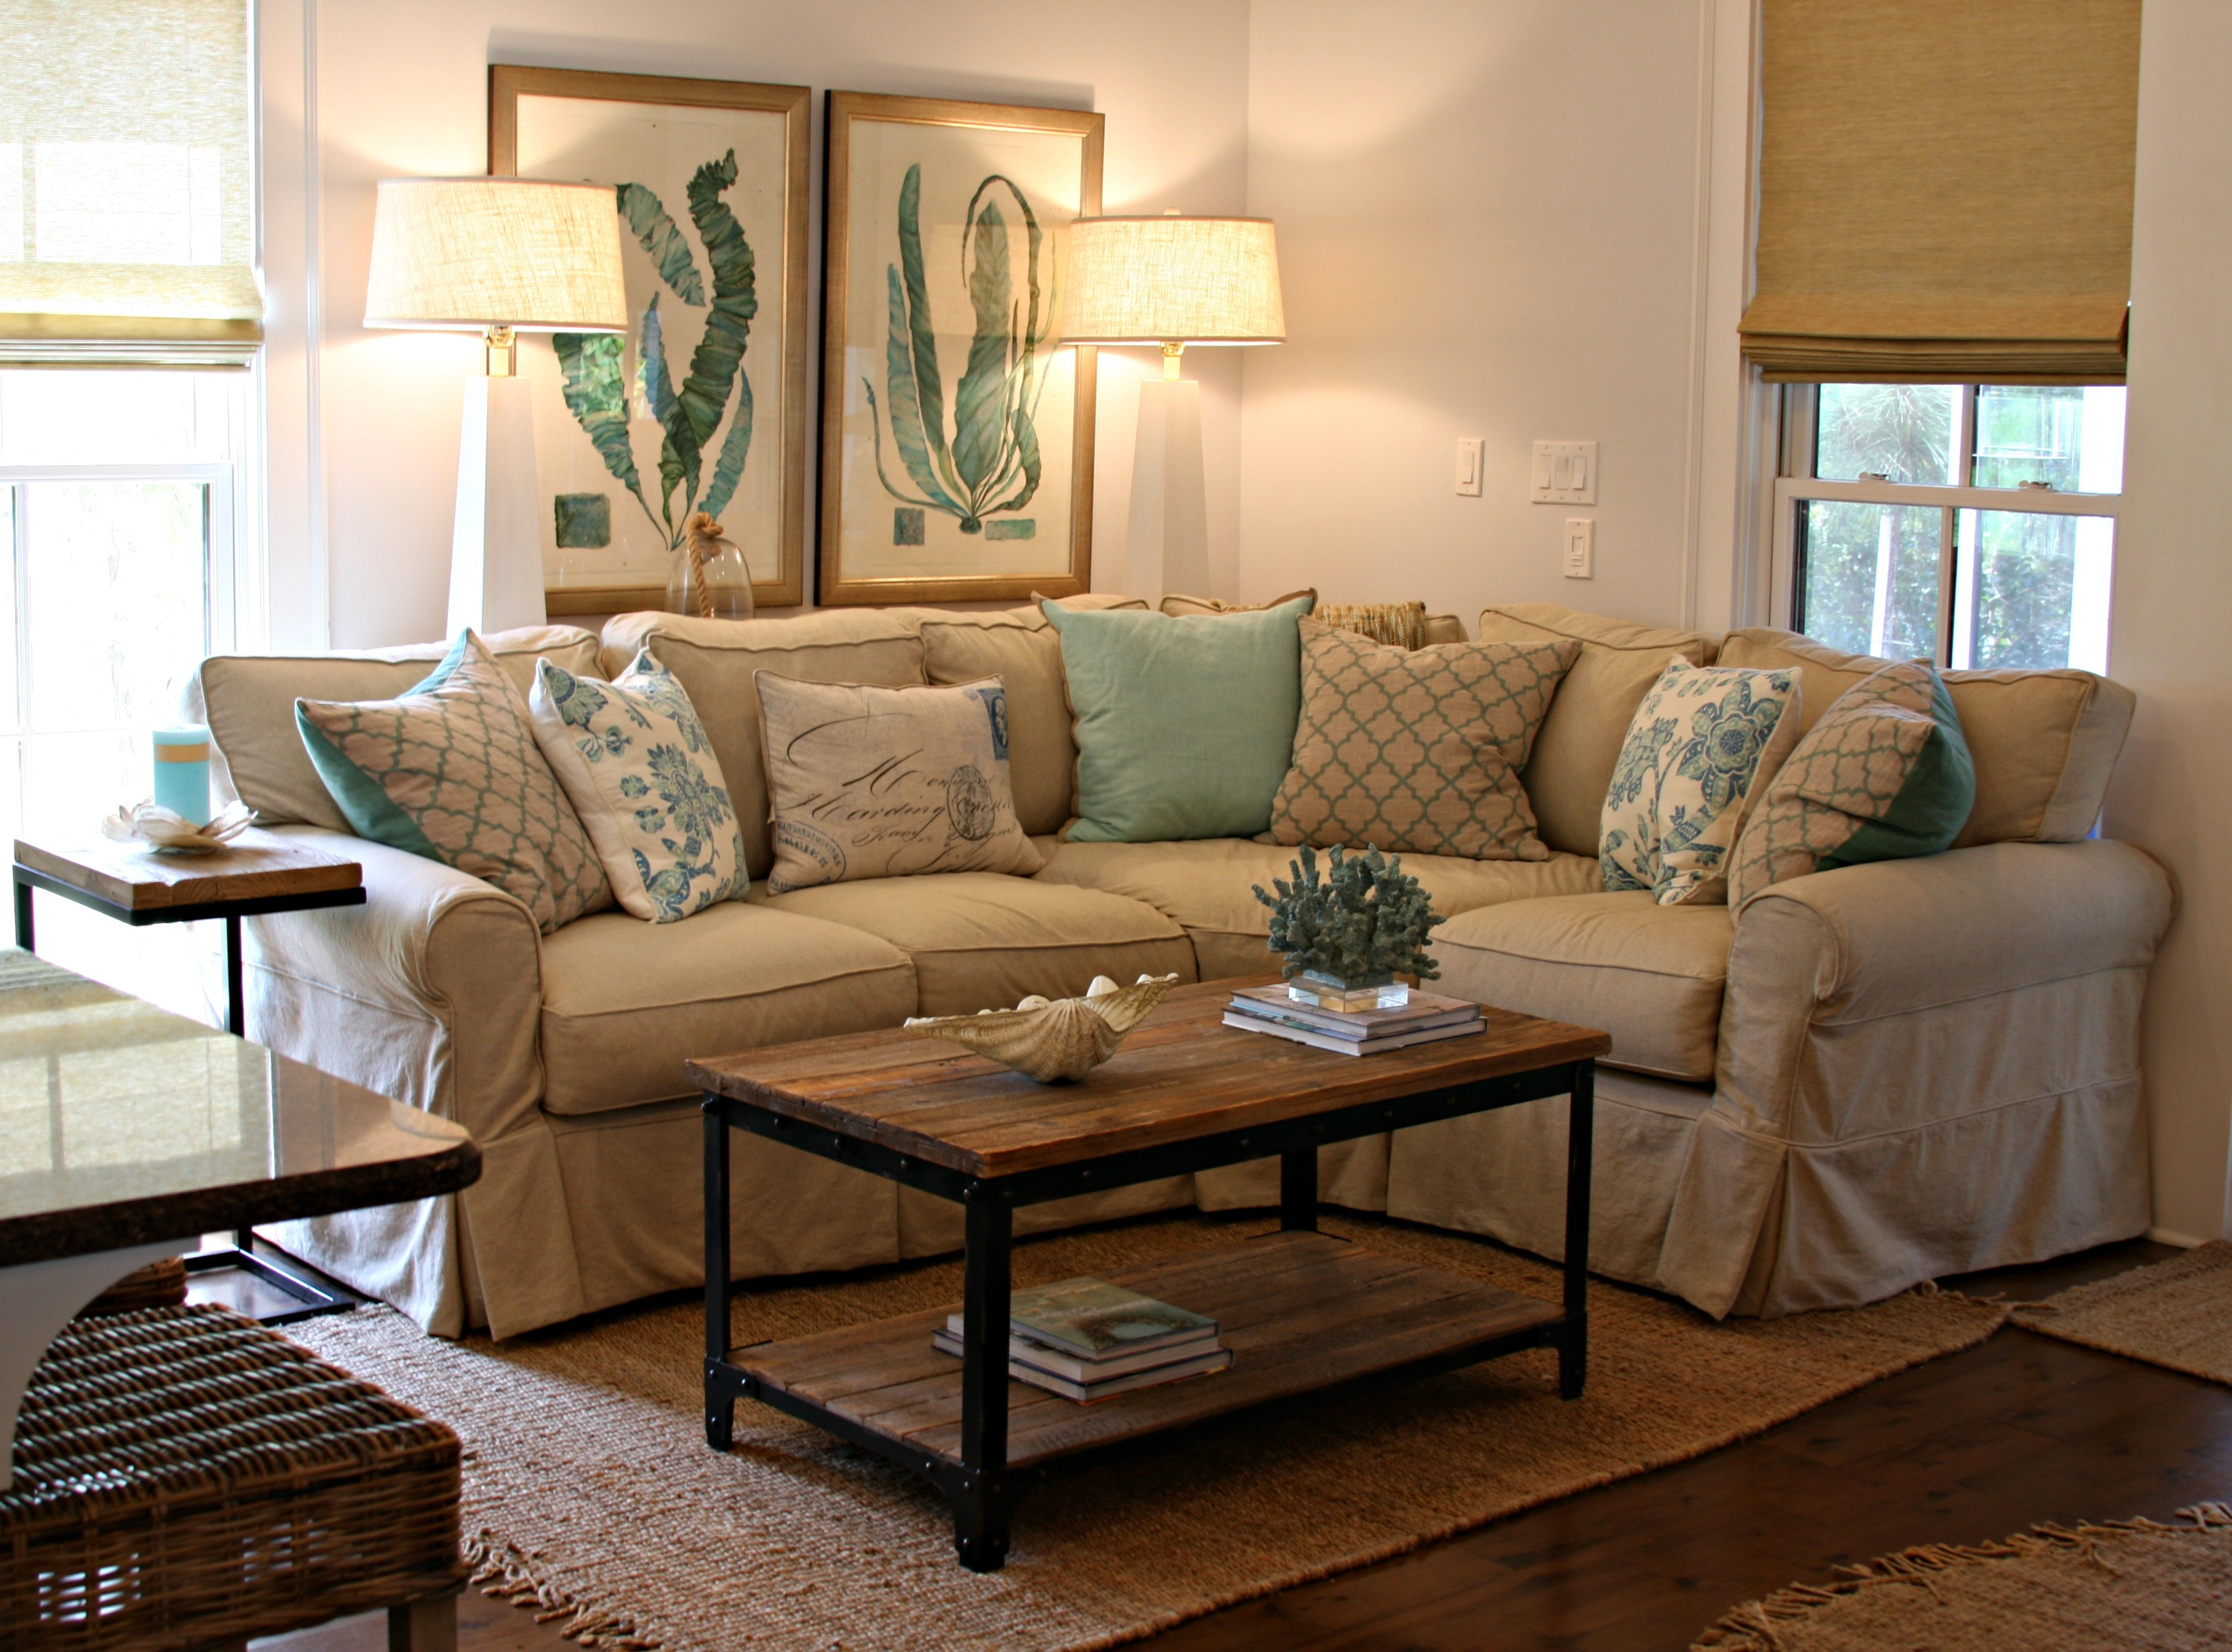 Best ideas about Living Room Sectional
. Save or Pin Watersound Beach Cottage Interior Design by Andrea Now.